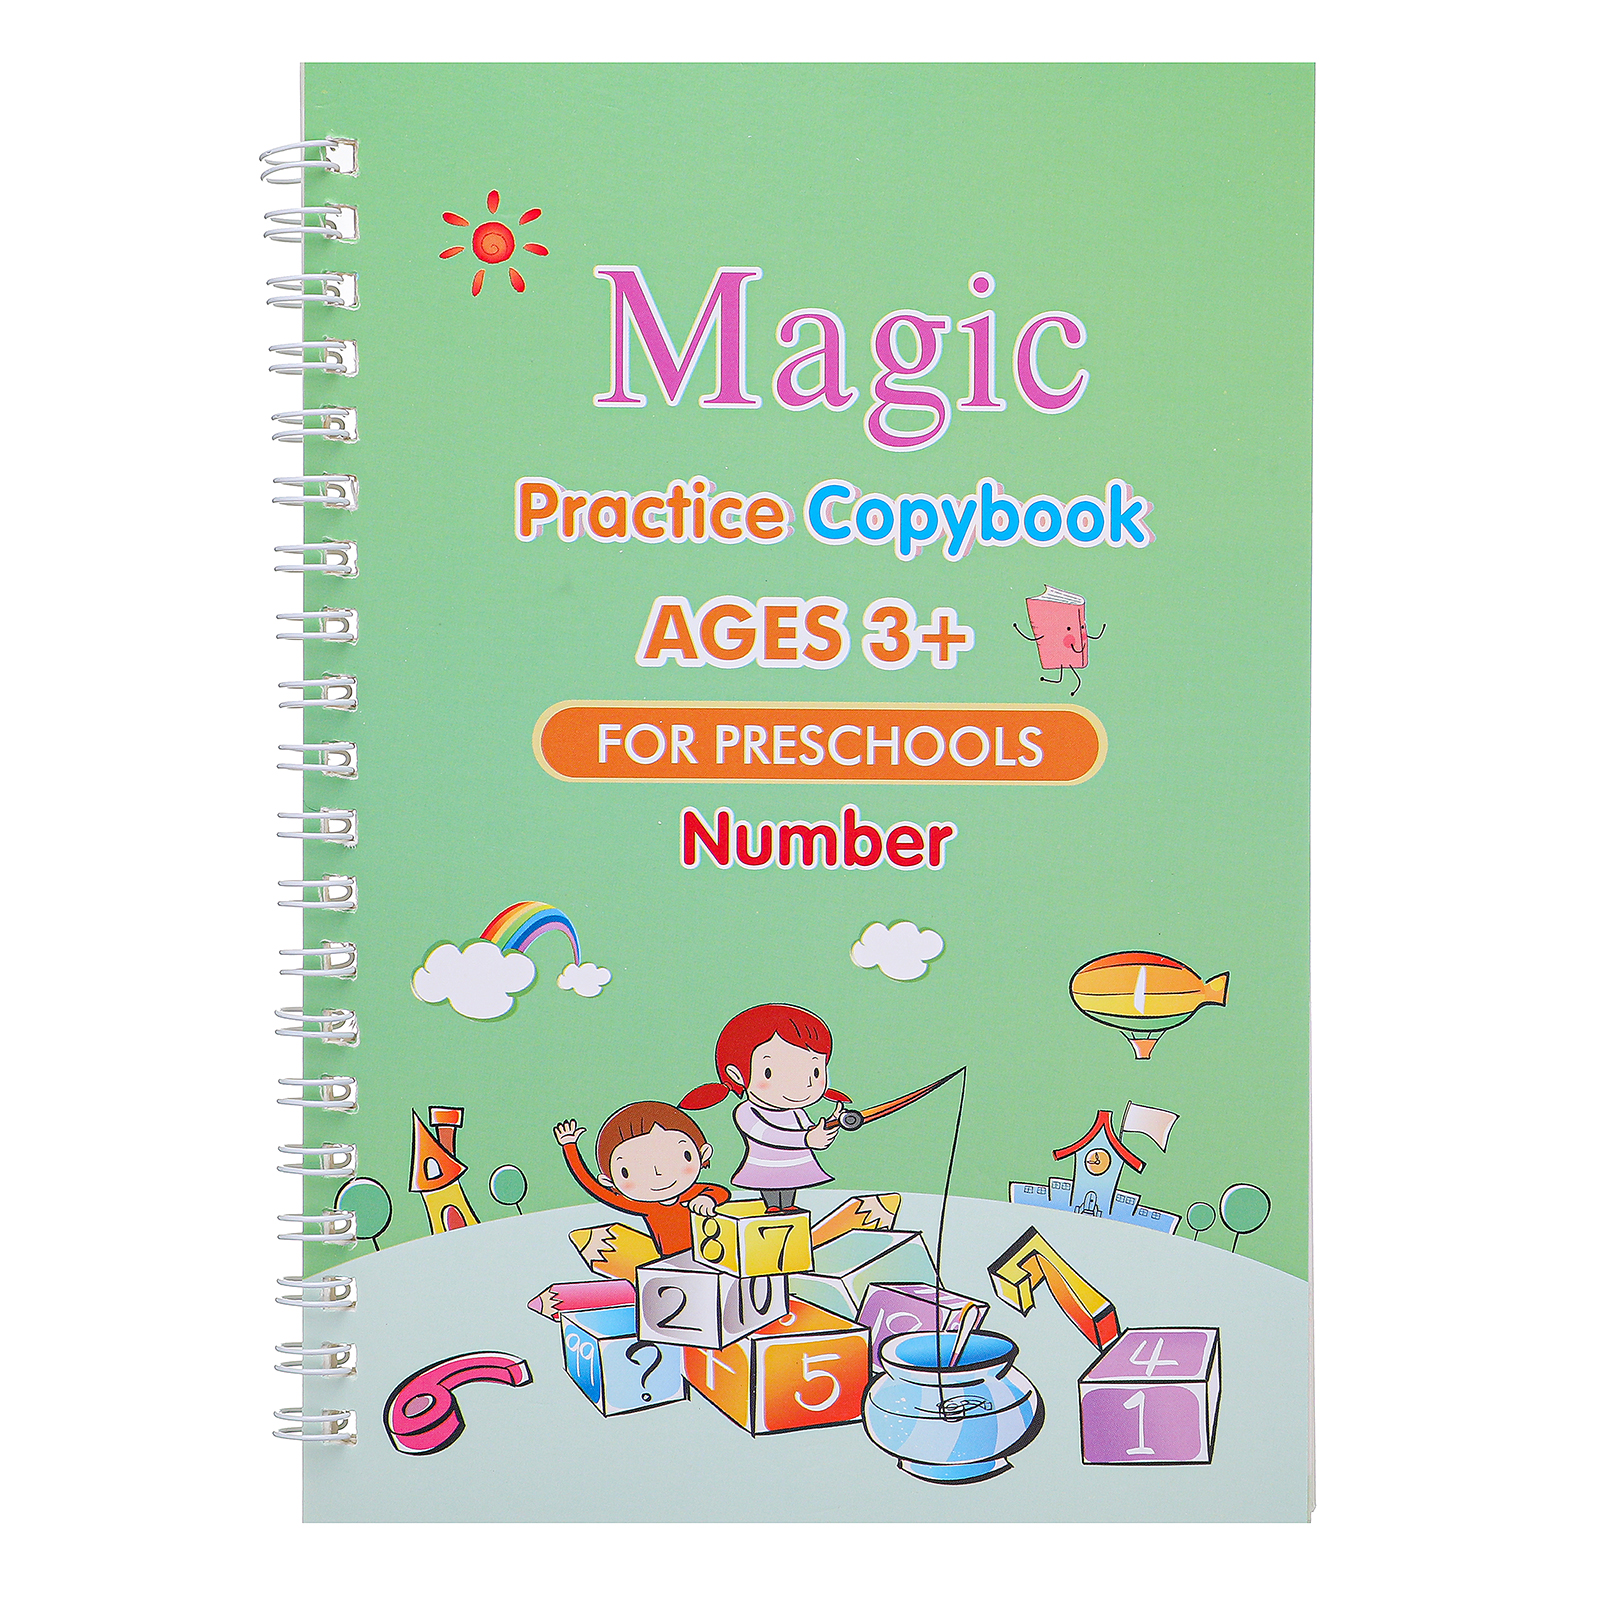 Find 8pcs Magic Practice Copybook for Kids Chanarily English Magic Calligraphy Reusable Handwriting Copybook Writing Practice Book with Magic Pens for Sale on Gipsybee.com with cryptocurrencies